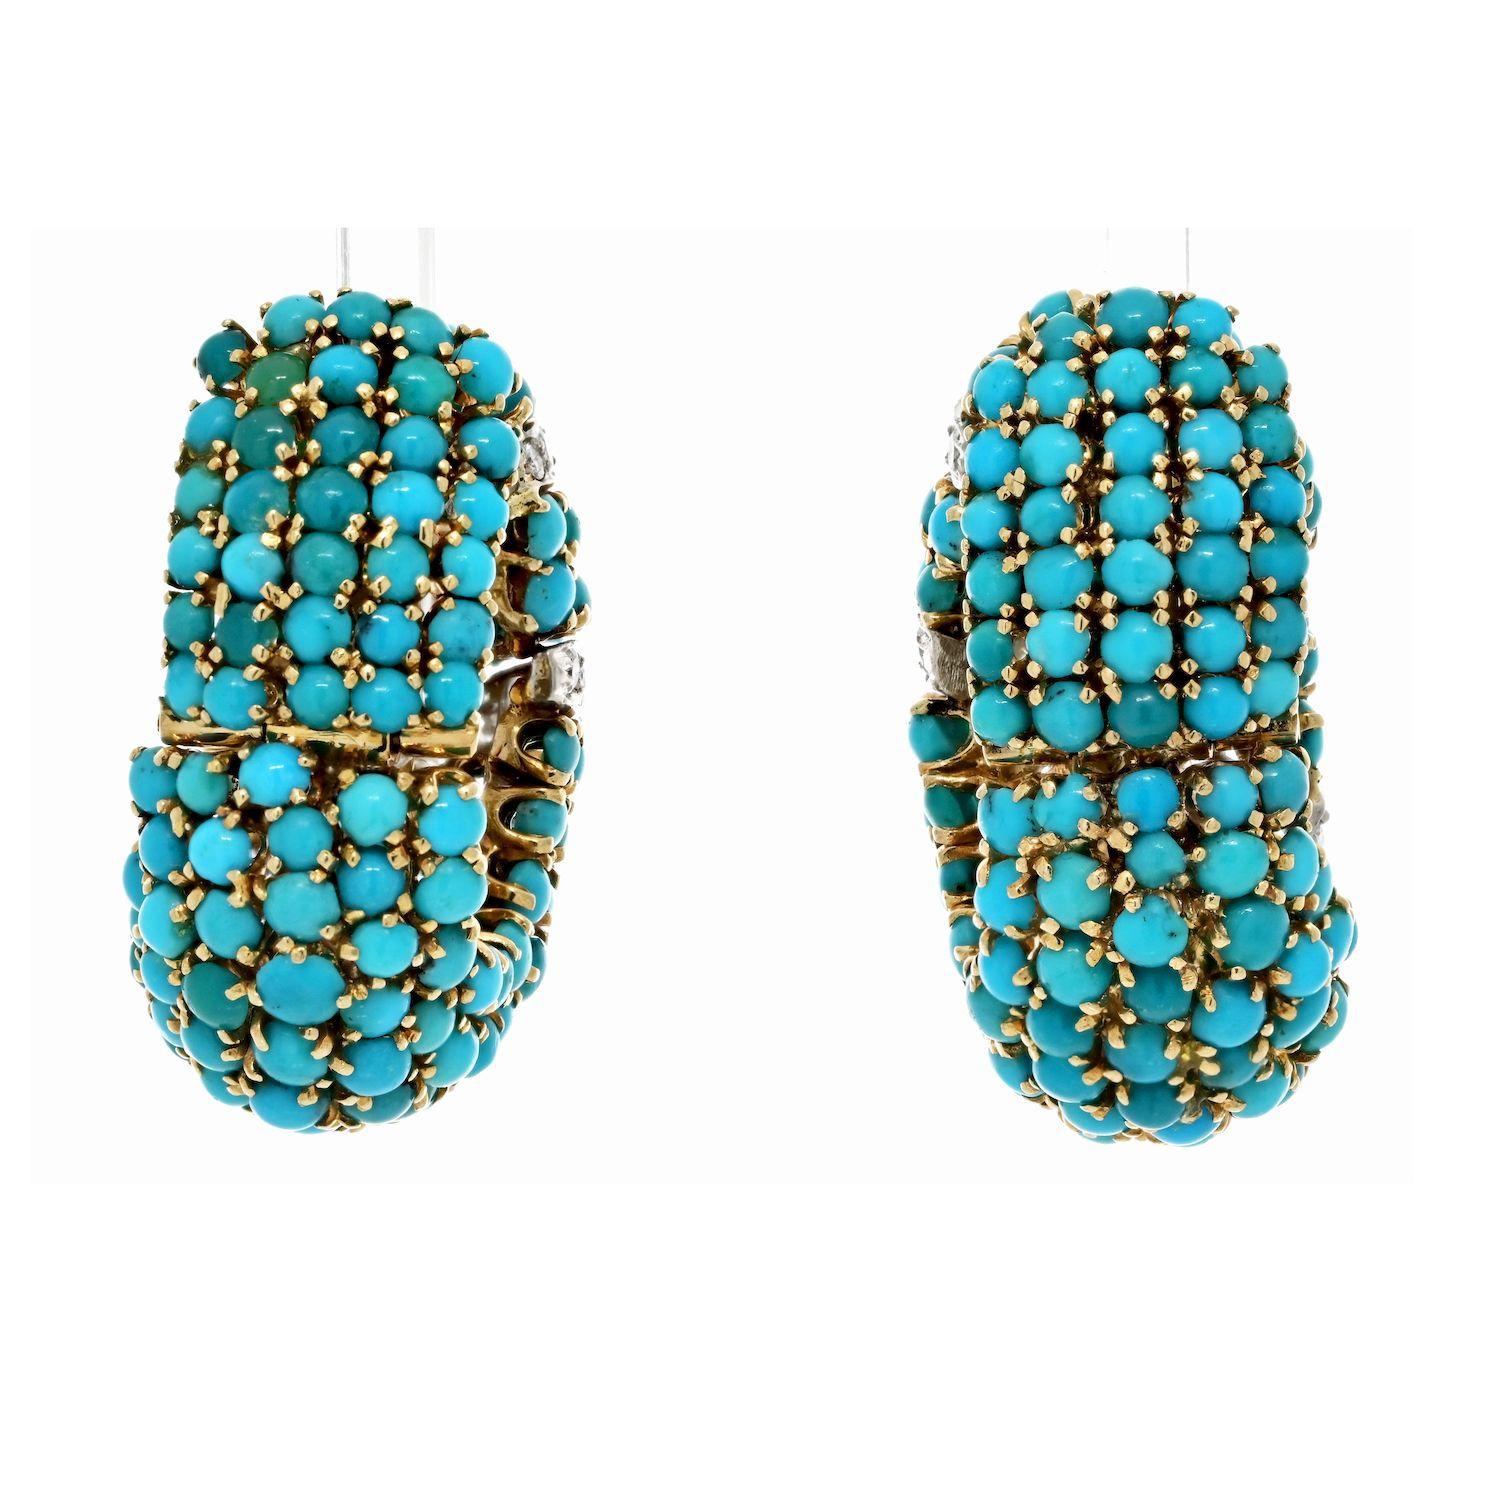 The breathtaking David Webb Turquoise and Diamond Bombe Shrimp Earrings, a true testament to the designer's mastery of artistry. Crafted in 18K yellow gold and platinum, these earrings exude a captivating blend of elegance and whimsy. Each earring